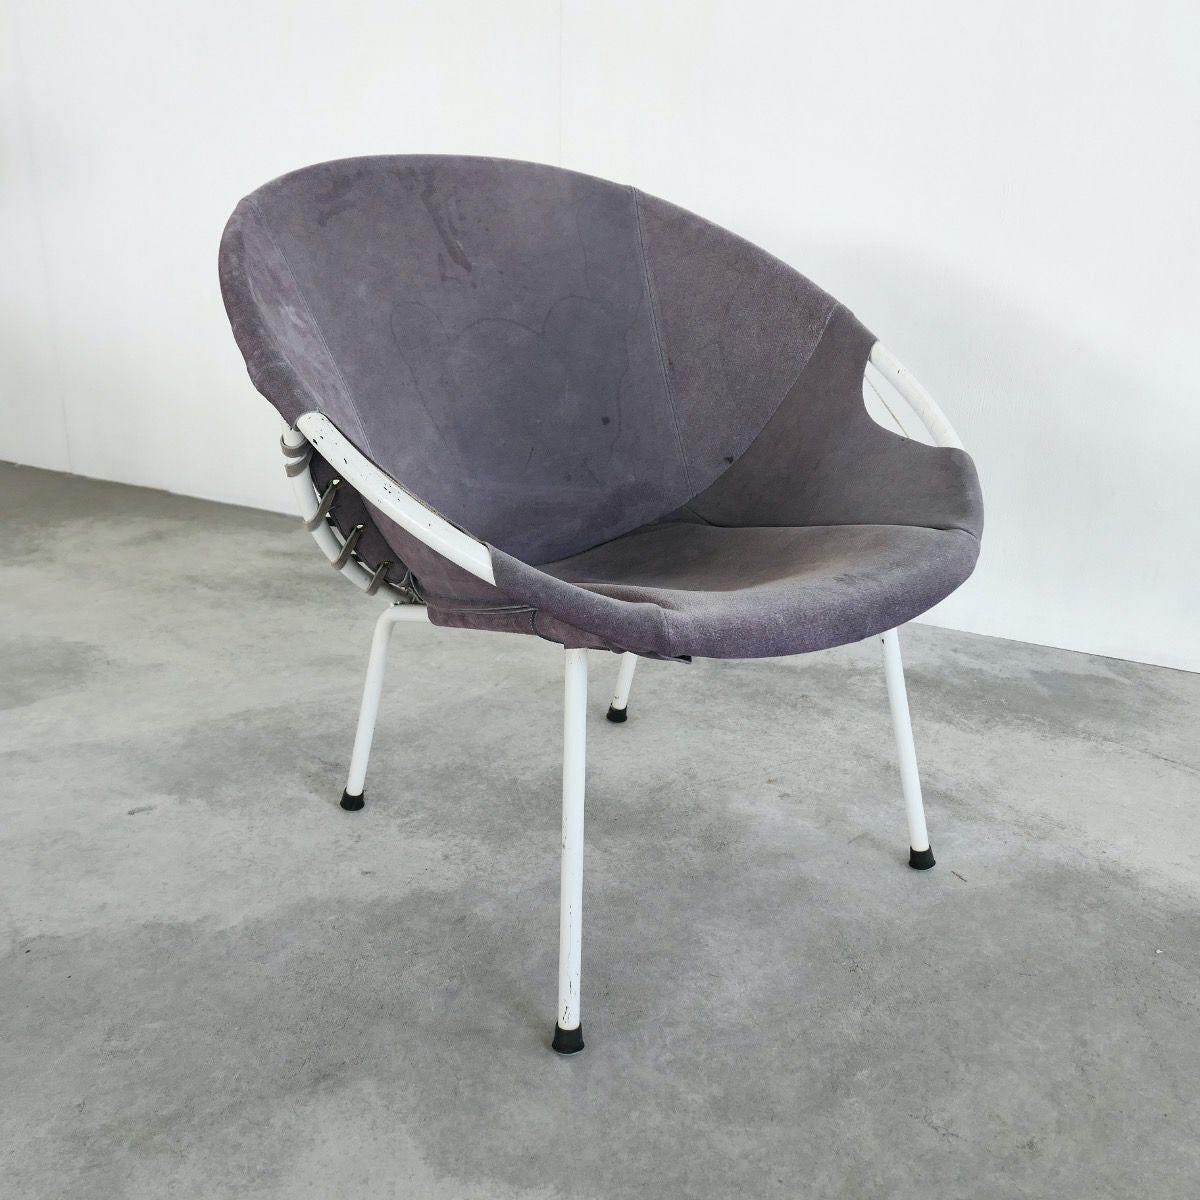 European Balloon Lounge Chair in Suede, 1960s For Sale